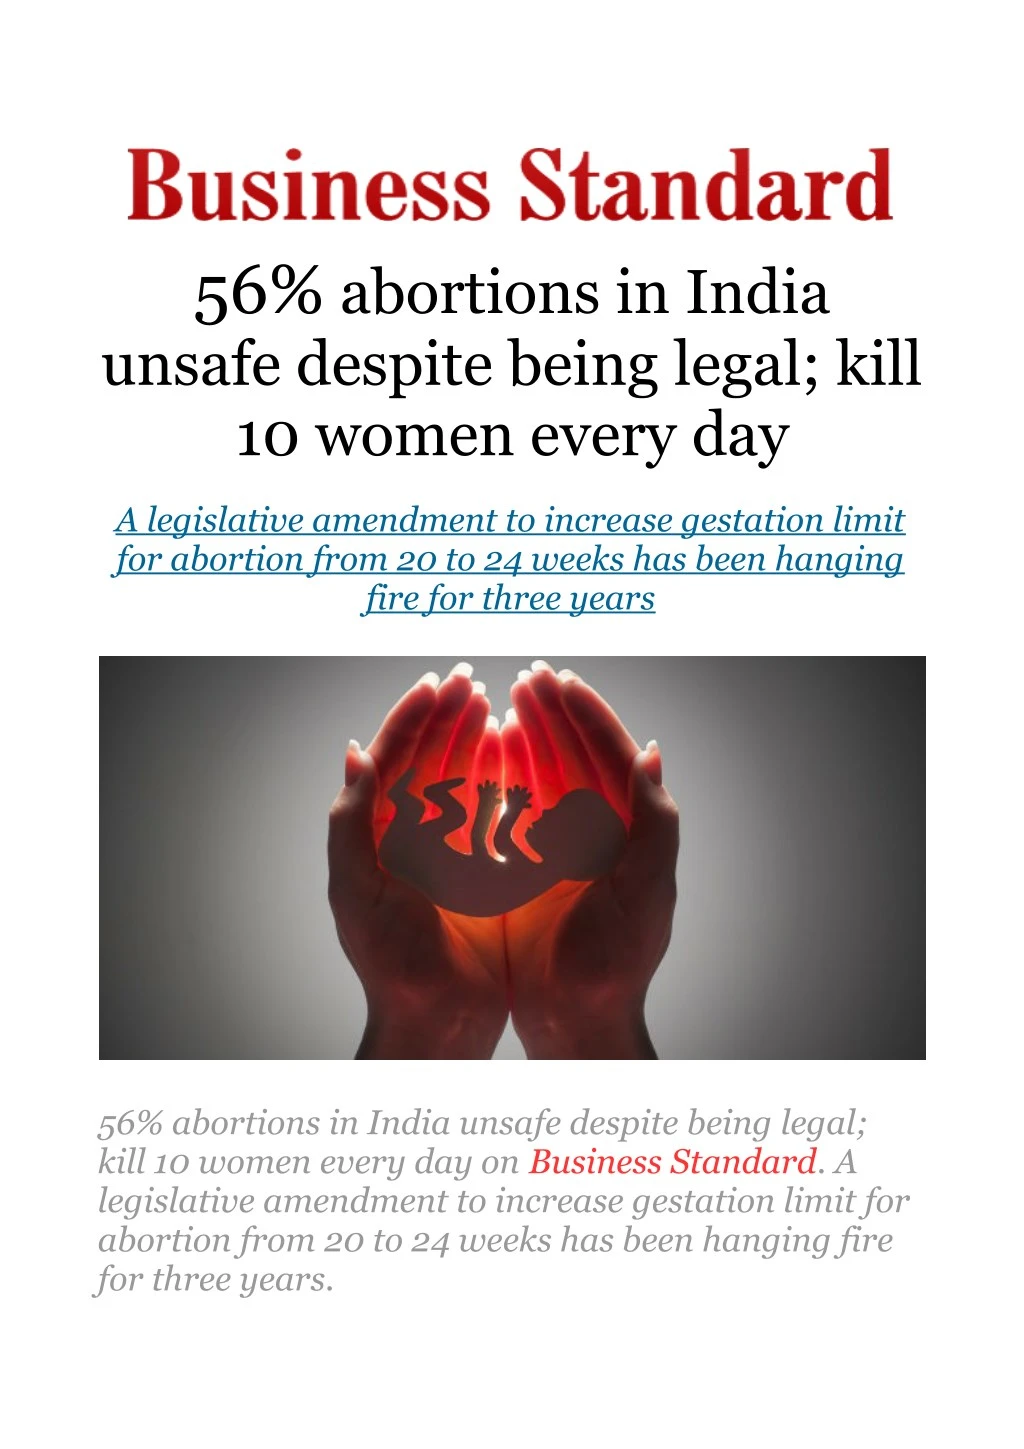 56 abortions in india unsafe despite being legal